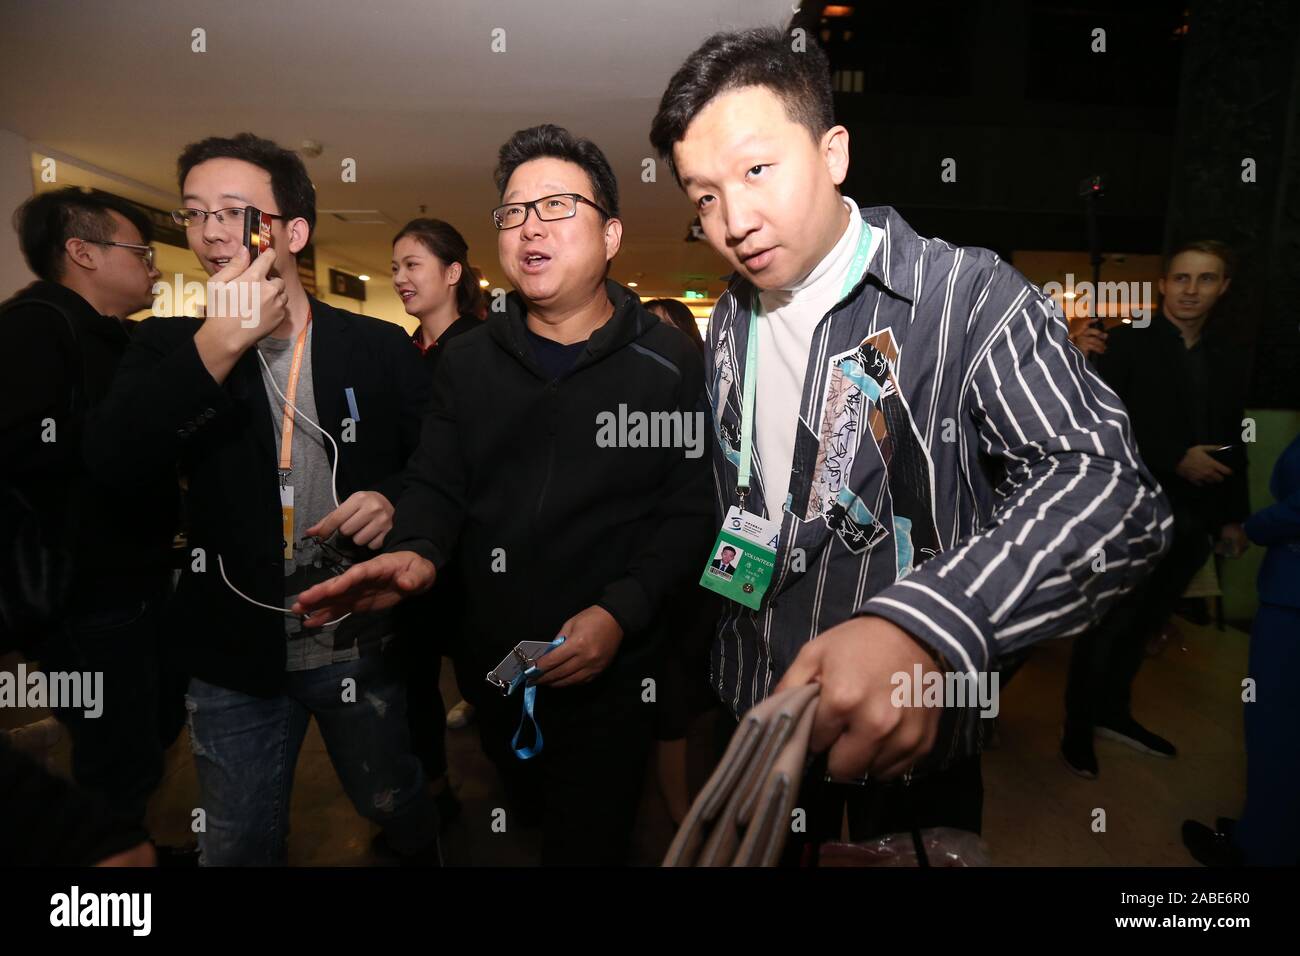 Chinese billionaire businessman Ding Lei, also known as William Ding, the founder and CEO of NetEase (163.com), middle, arrives at Wuzhen to attend th Stock Photo